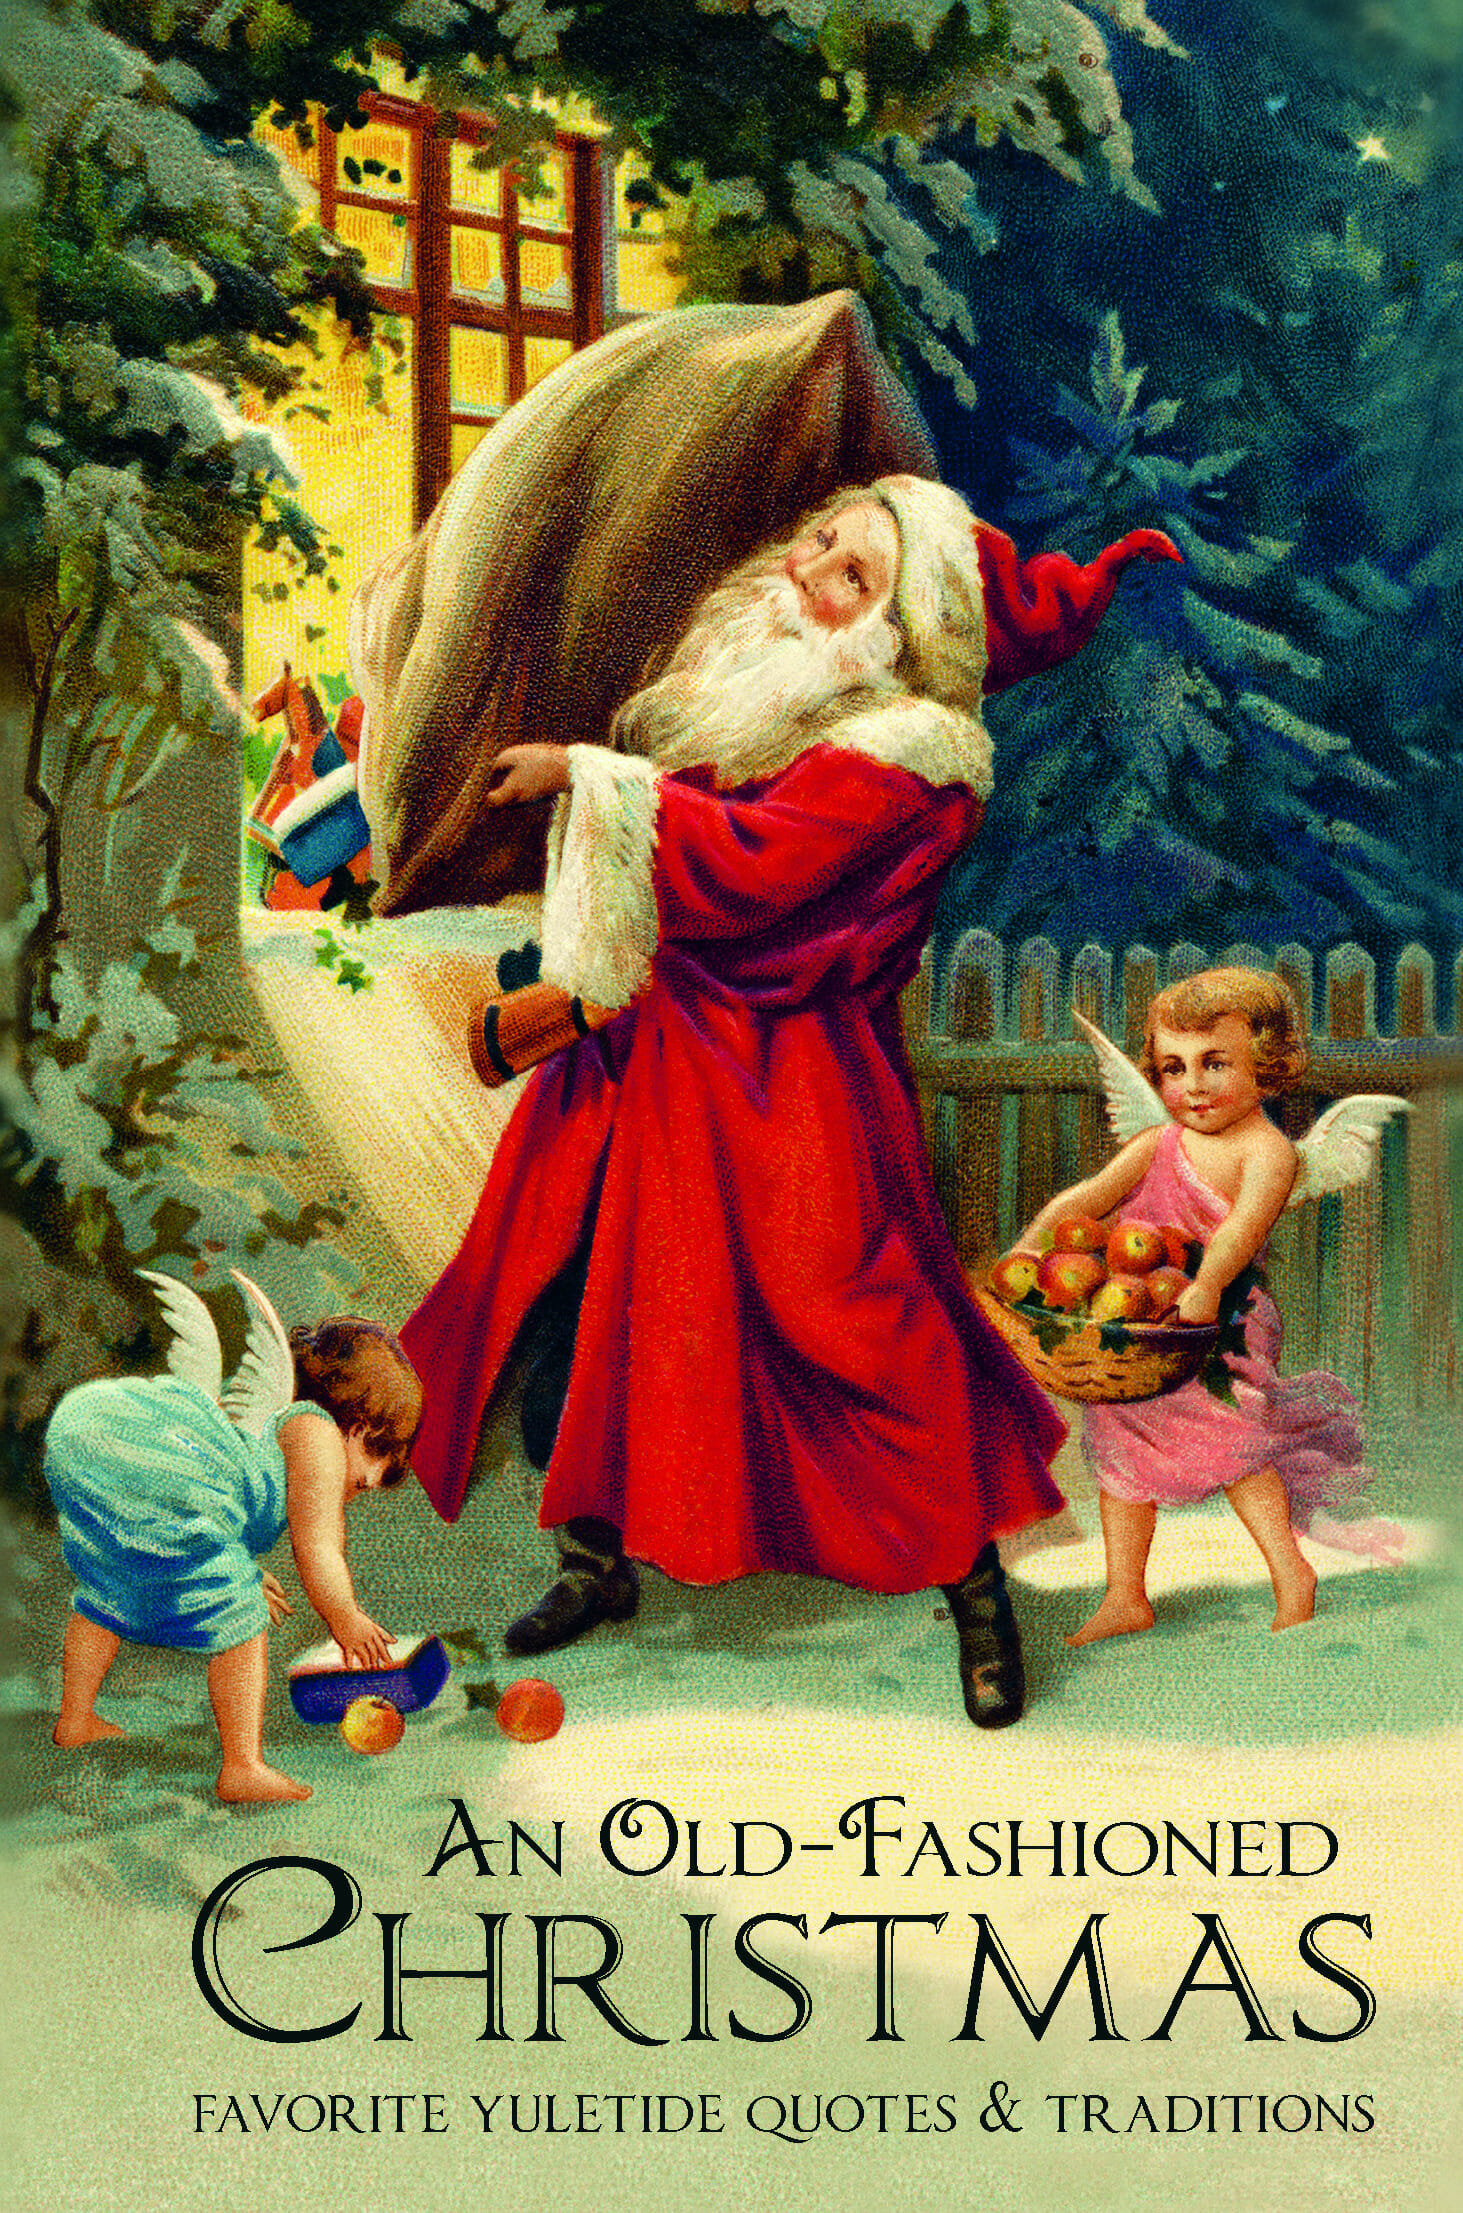 An Old-Fashion Christmas Book Review - BB Product Reviews